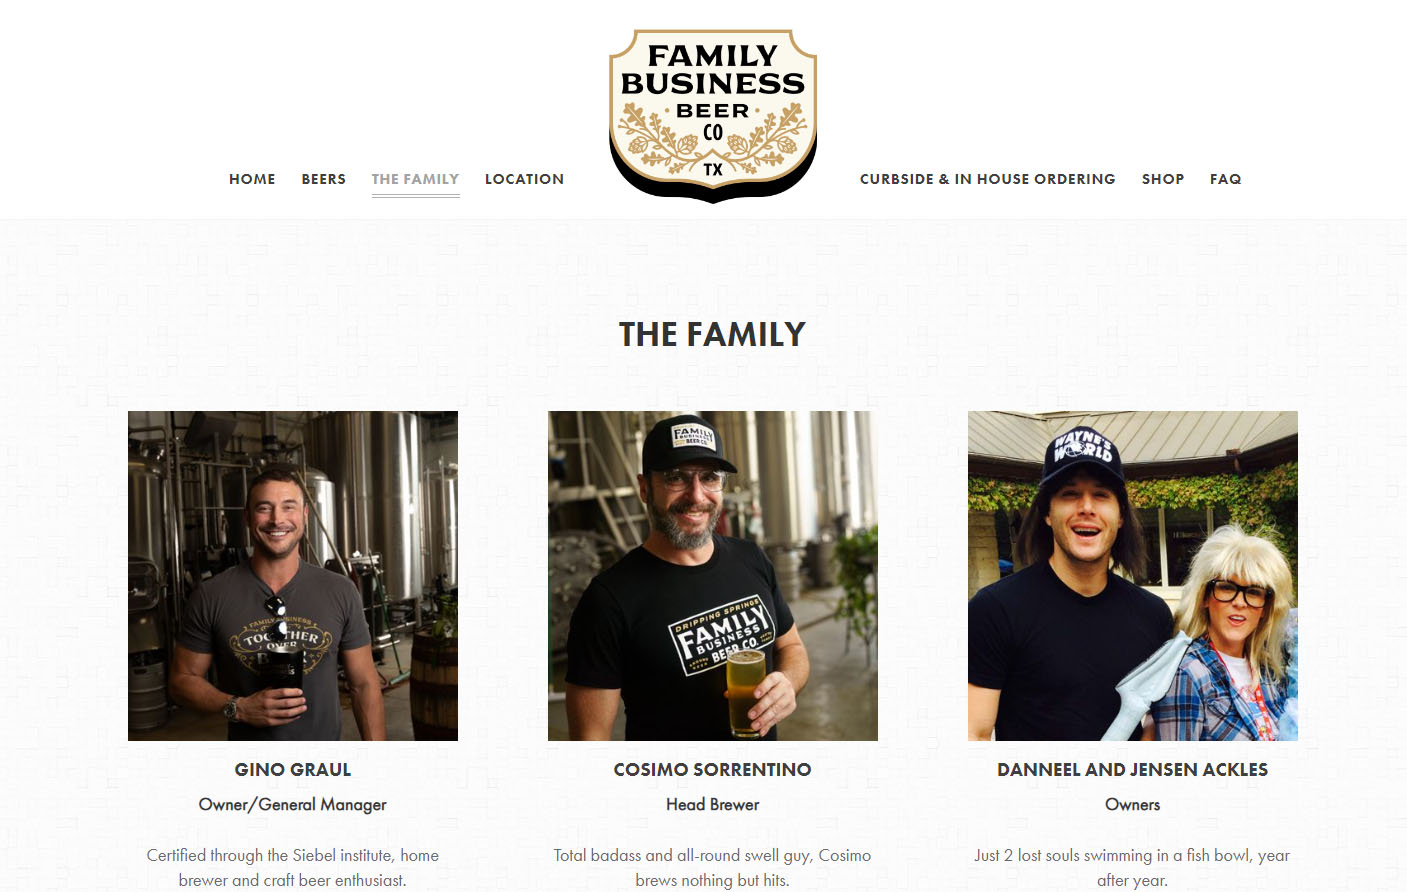 The owners of Family Business Beer Company.